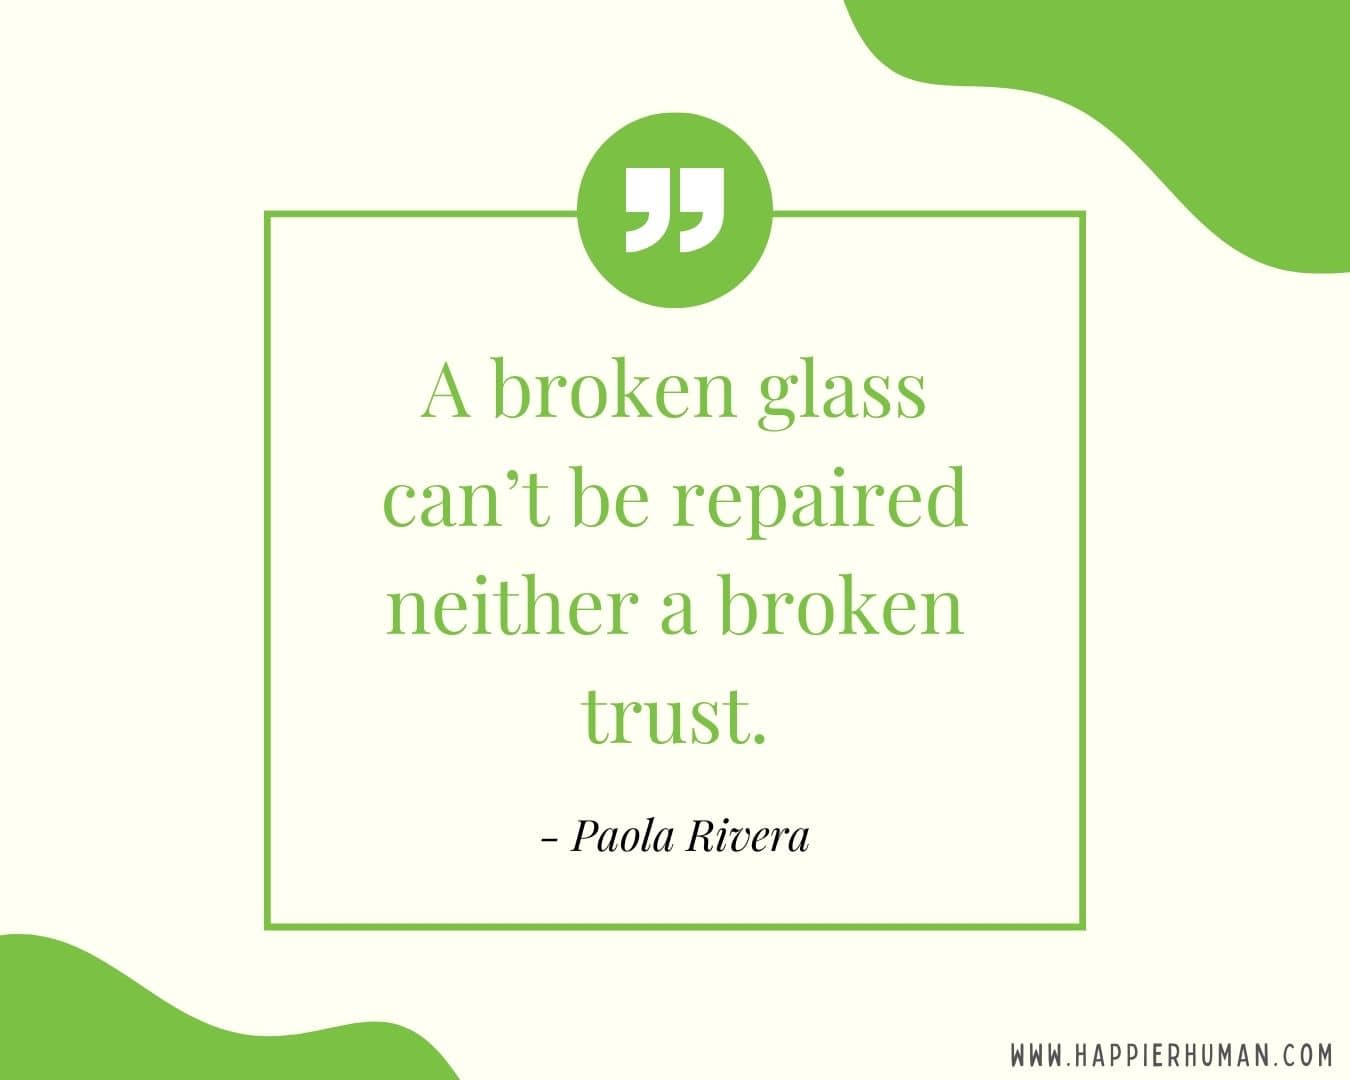 Broken Trust Quotes - “A broken glass can’t be repaired neither a broken trust.” - Paola Rivera